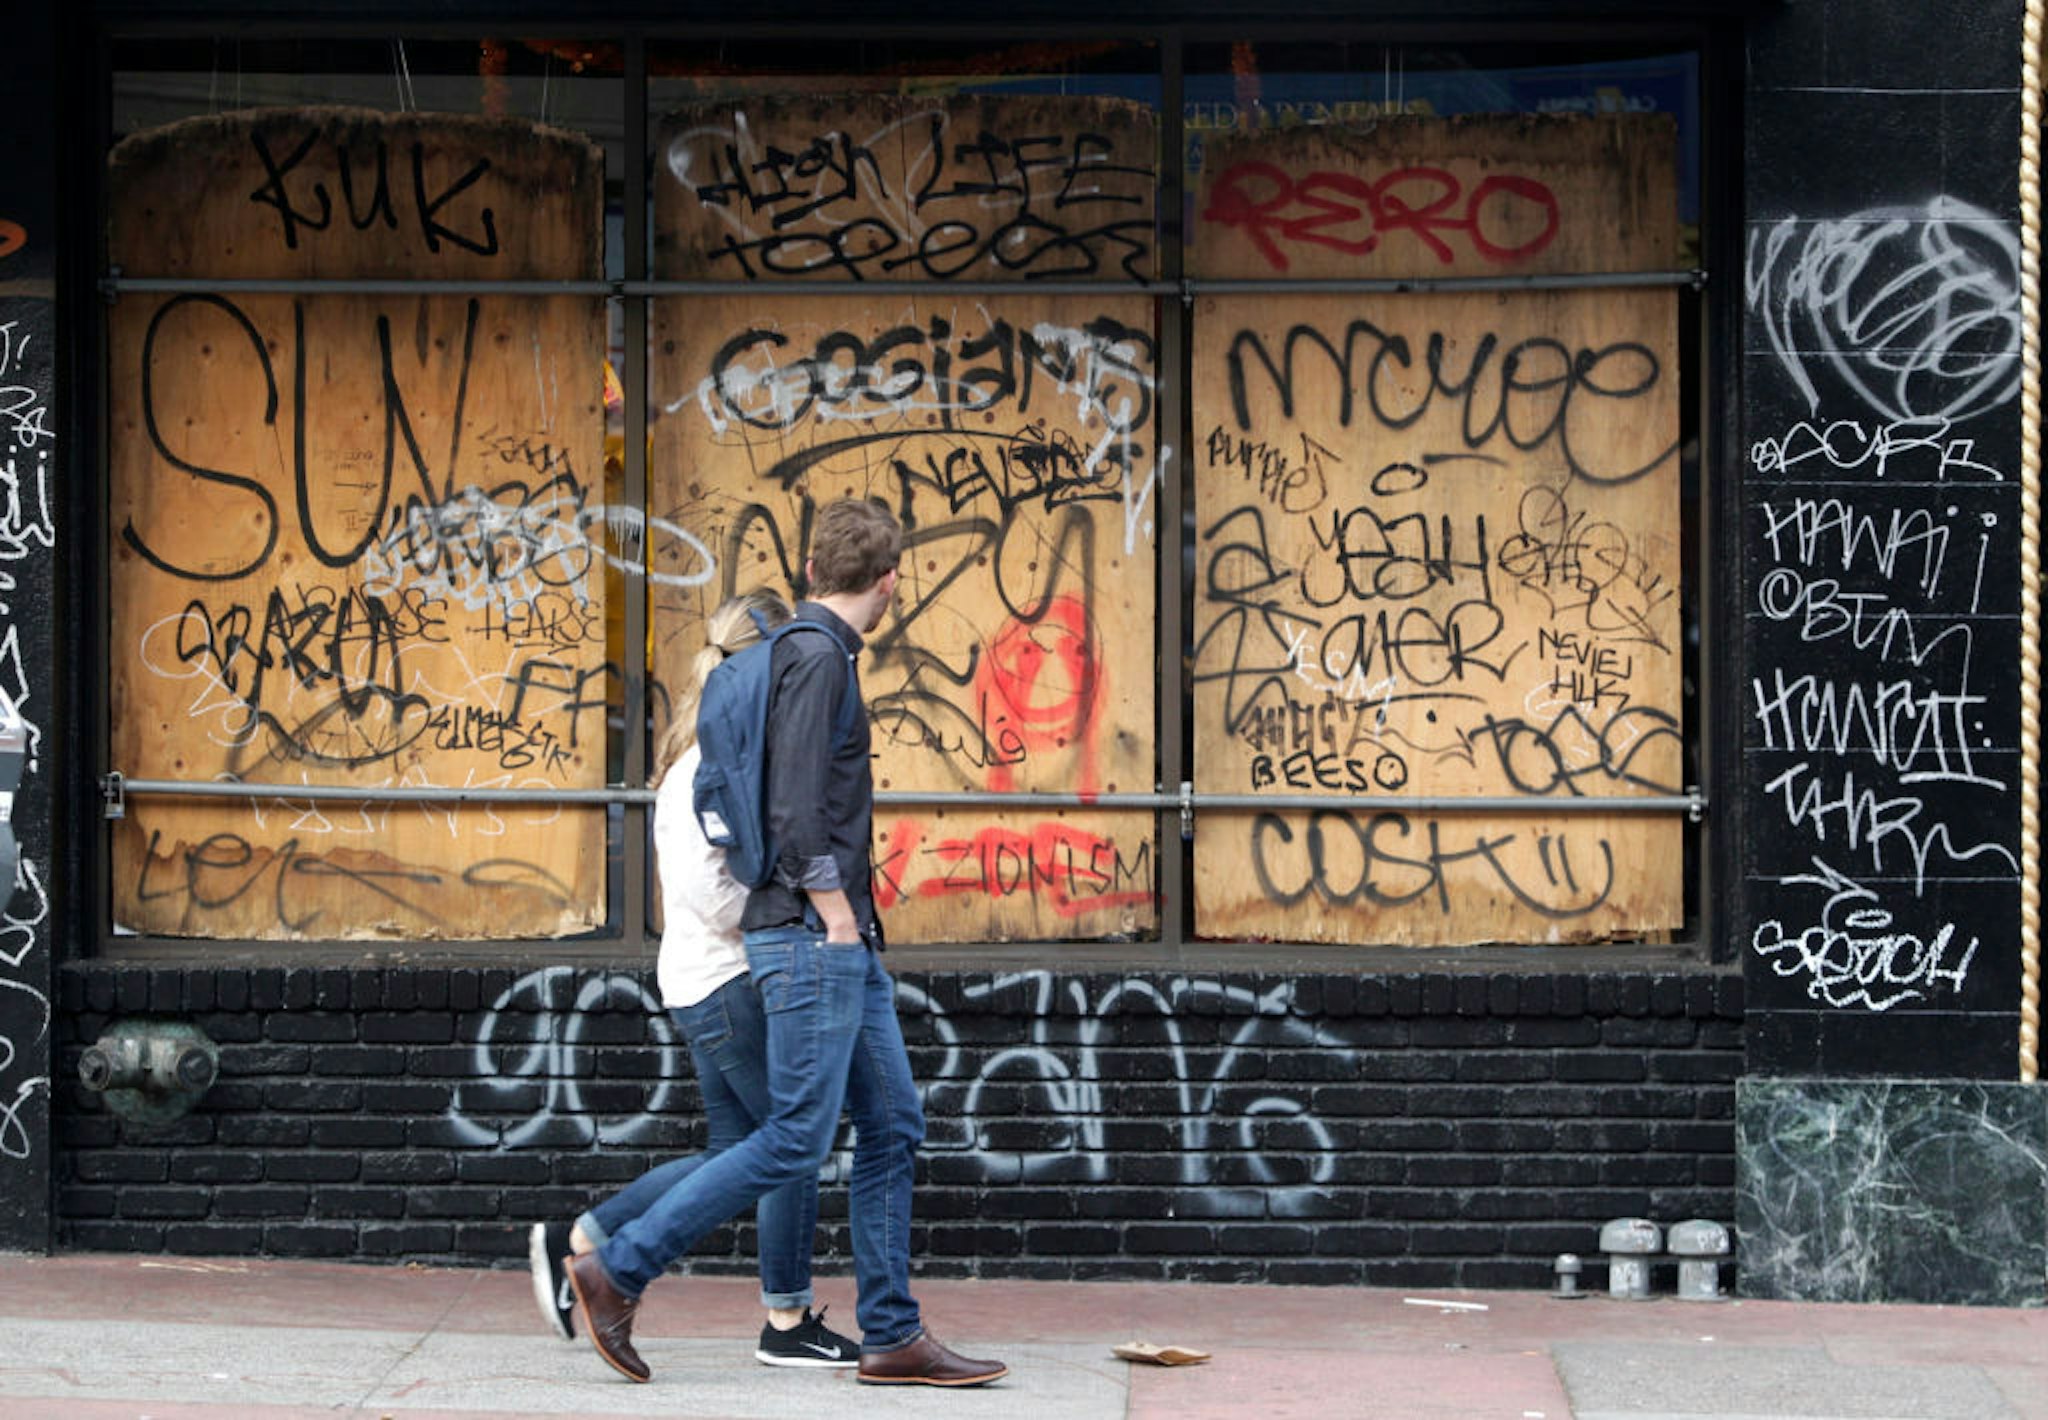 Pedestrians walk past a graffiti covered storefront on Mission Street in San Francisco, Calif. on Thursday, Oct. 30, 2014 after the Giants beat the Kansas City Royals in the World Series. The celebration turned ugly when crowds became unruly and vandalized several businesses and vehicles. (Photo By Paul Chinn/The San Francisco Chronicle via Getty Images)